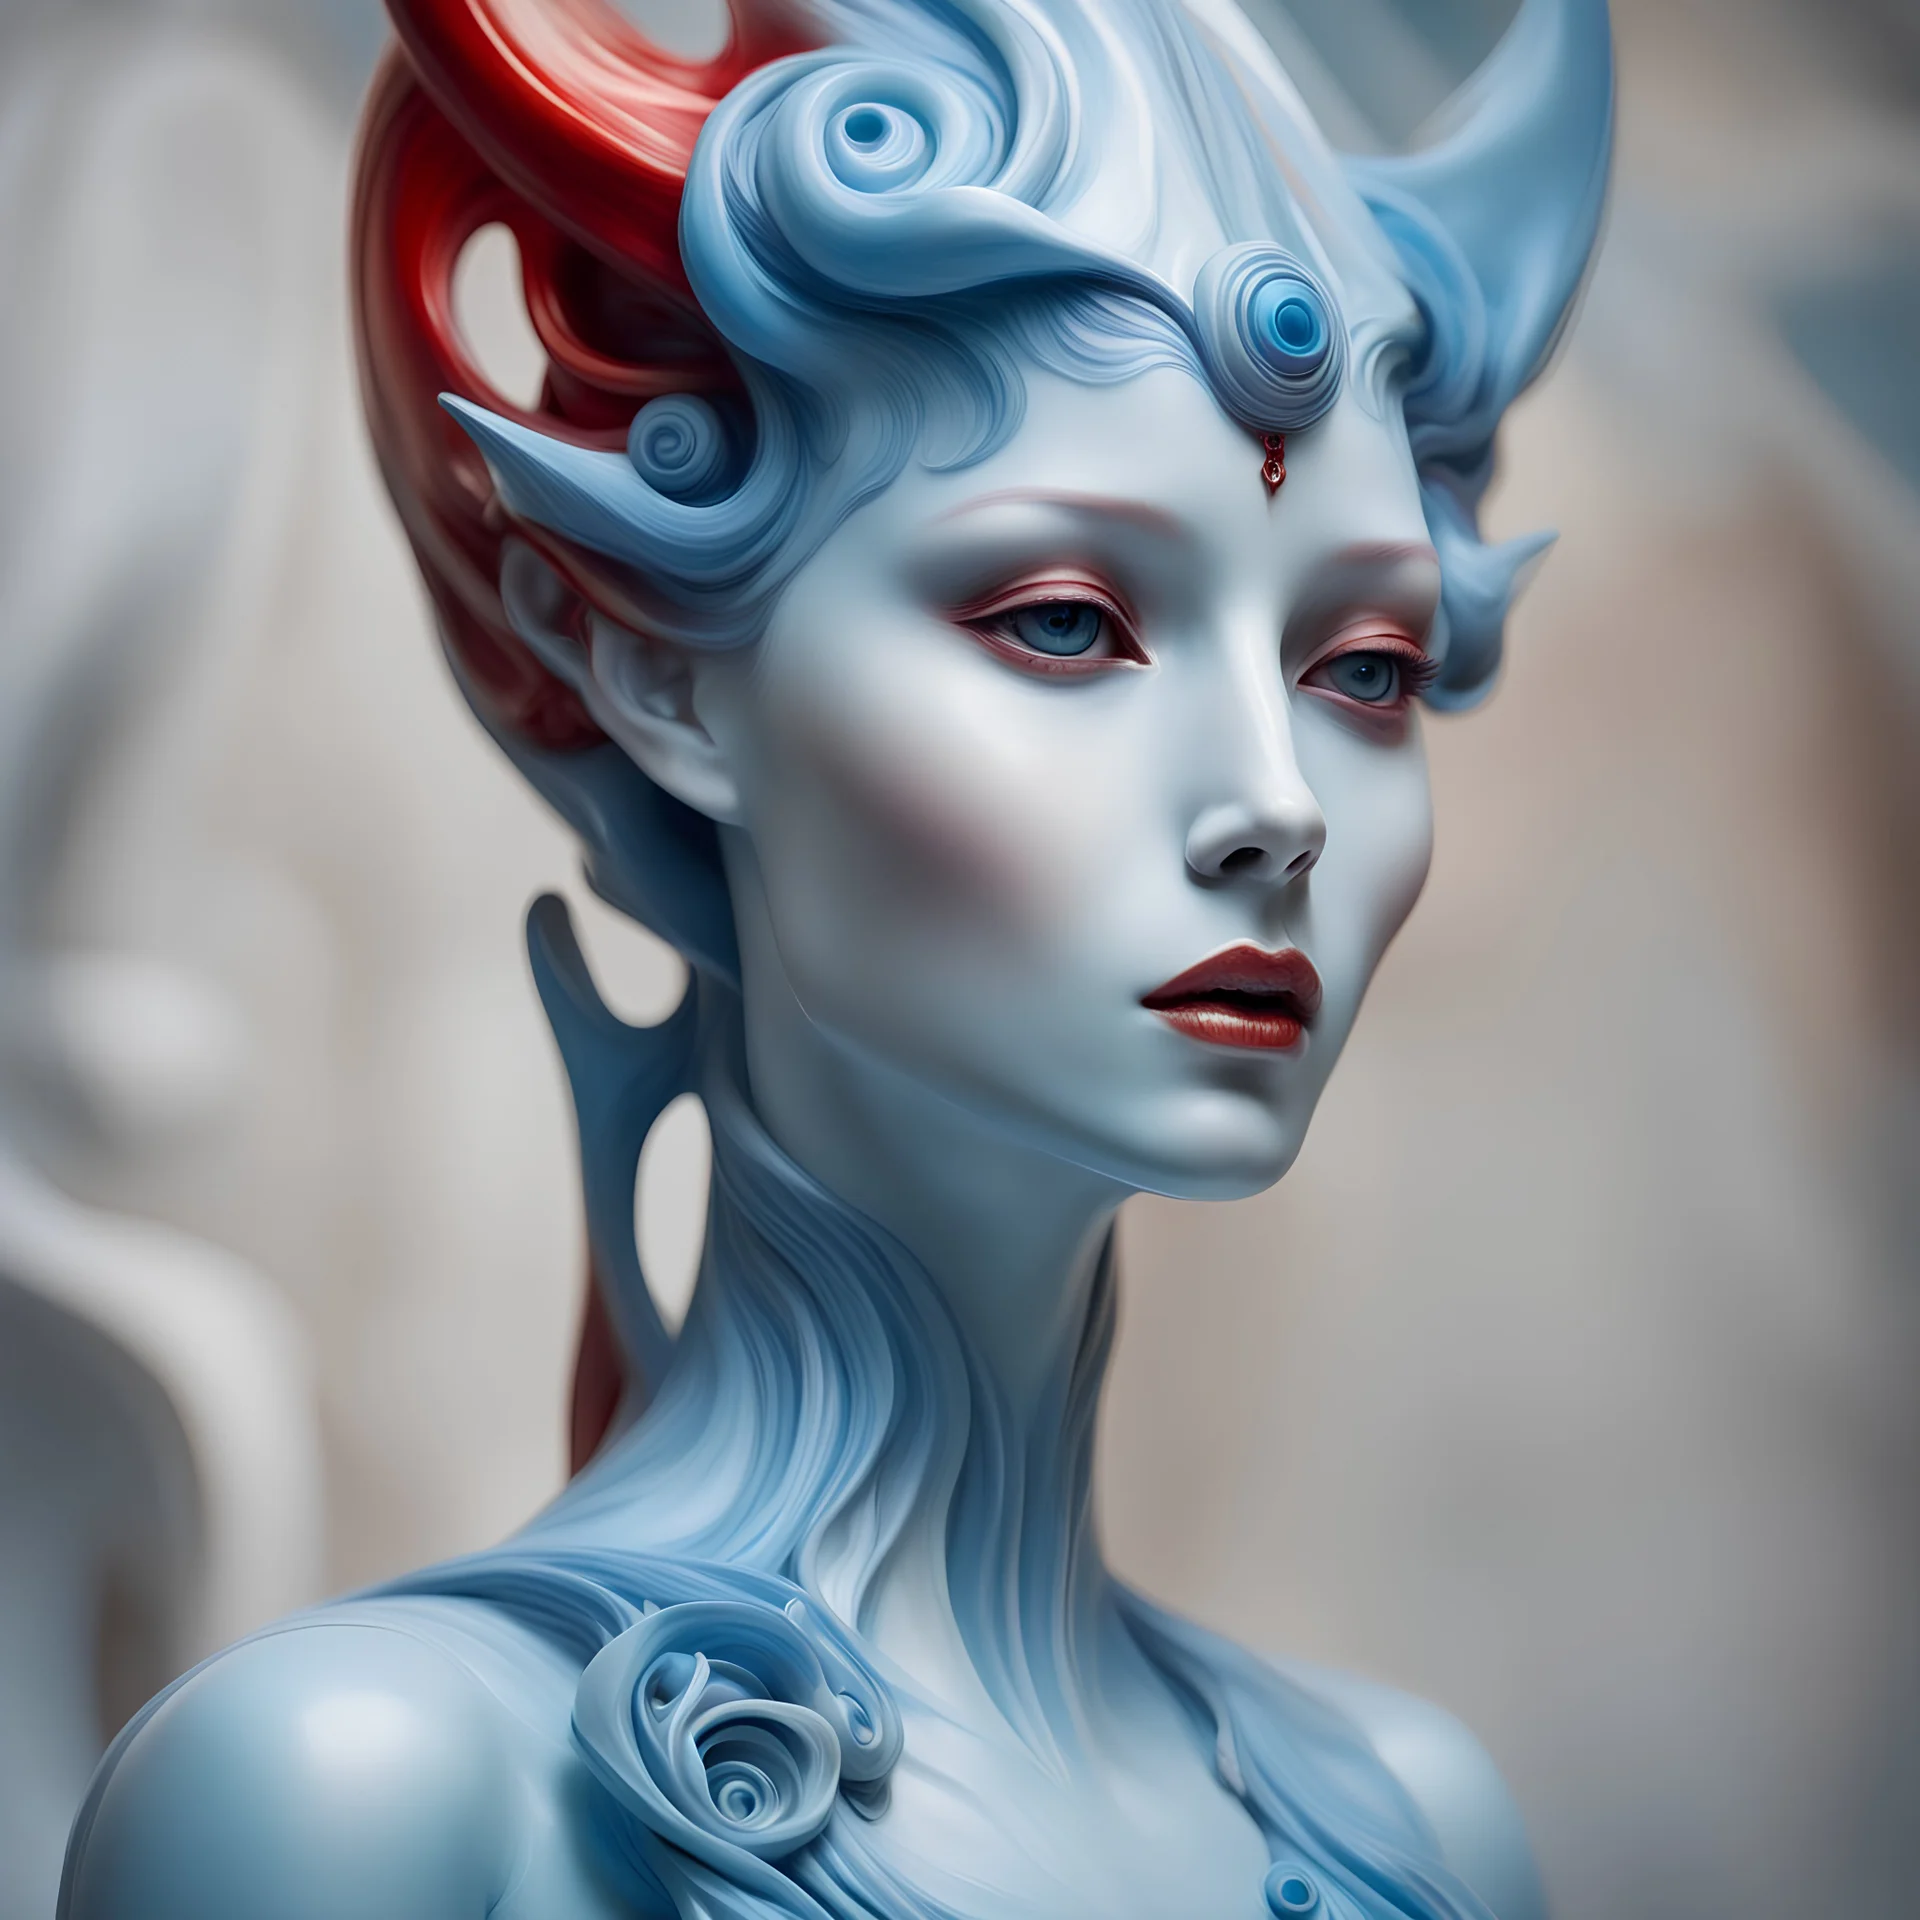 a close up of a statue of a woman, in style of anna dittmann, porcelain cyborg, blue and red two - tone, gray alien, tim hildebrant, highly capsuled, anthro art, slightly - pointed ears, fluid and dynamic forms, amphora, unusually unique beauty, billy butcher, design milk, focused on neck, ceramics